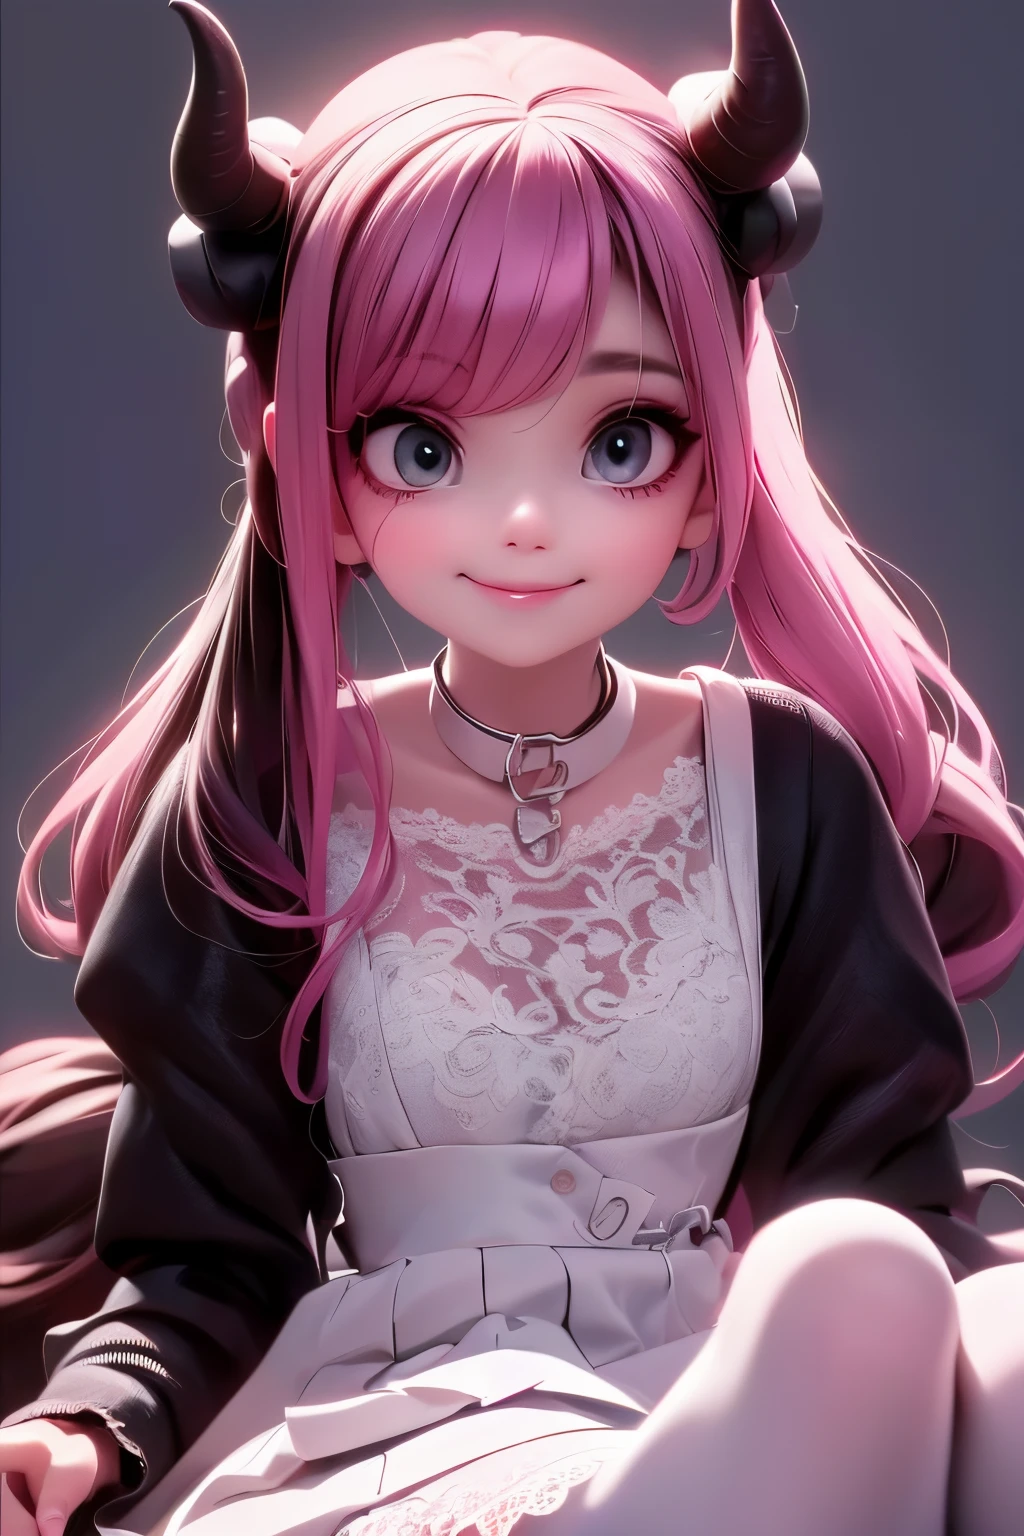 a close up of a demon girl smiling in a lace skirt and a lace shirt, smokey eyes makeup, white tights, she is wearing lace streetwear, collar, choke, pumps, fashionable rpg clothing,